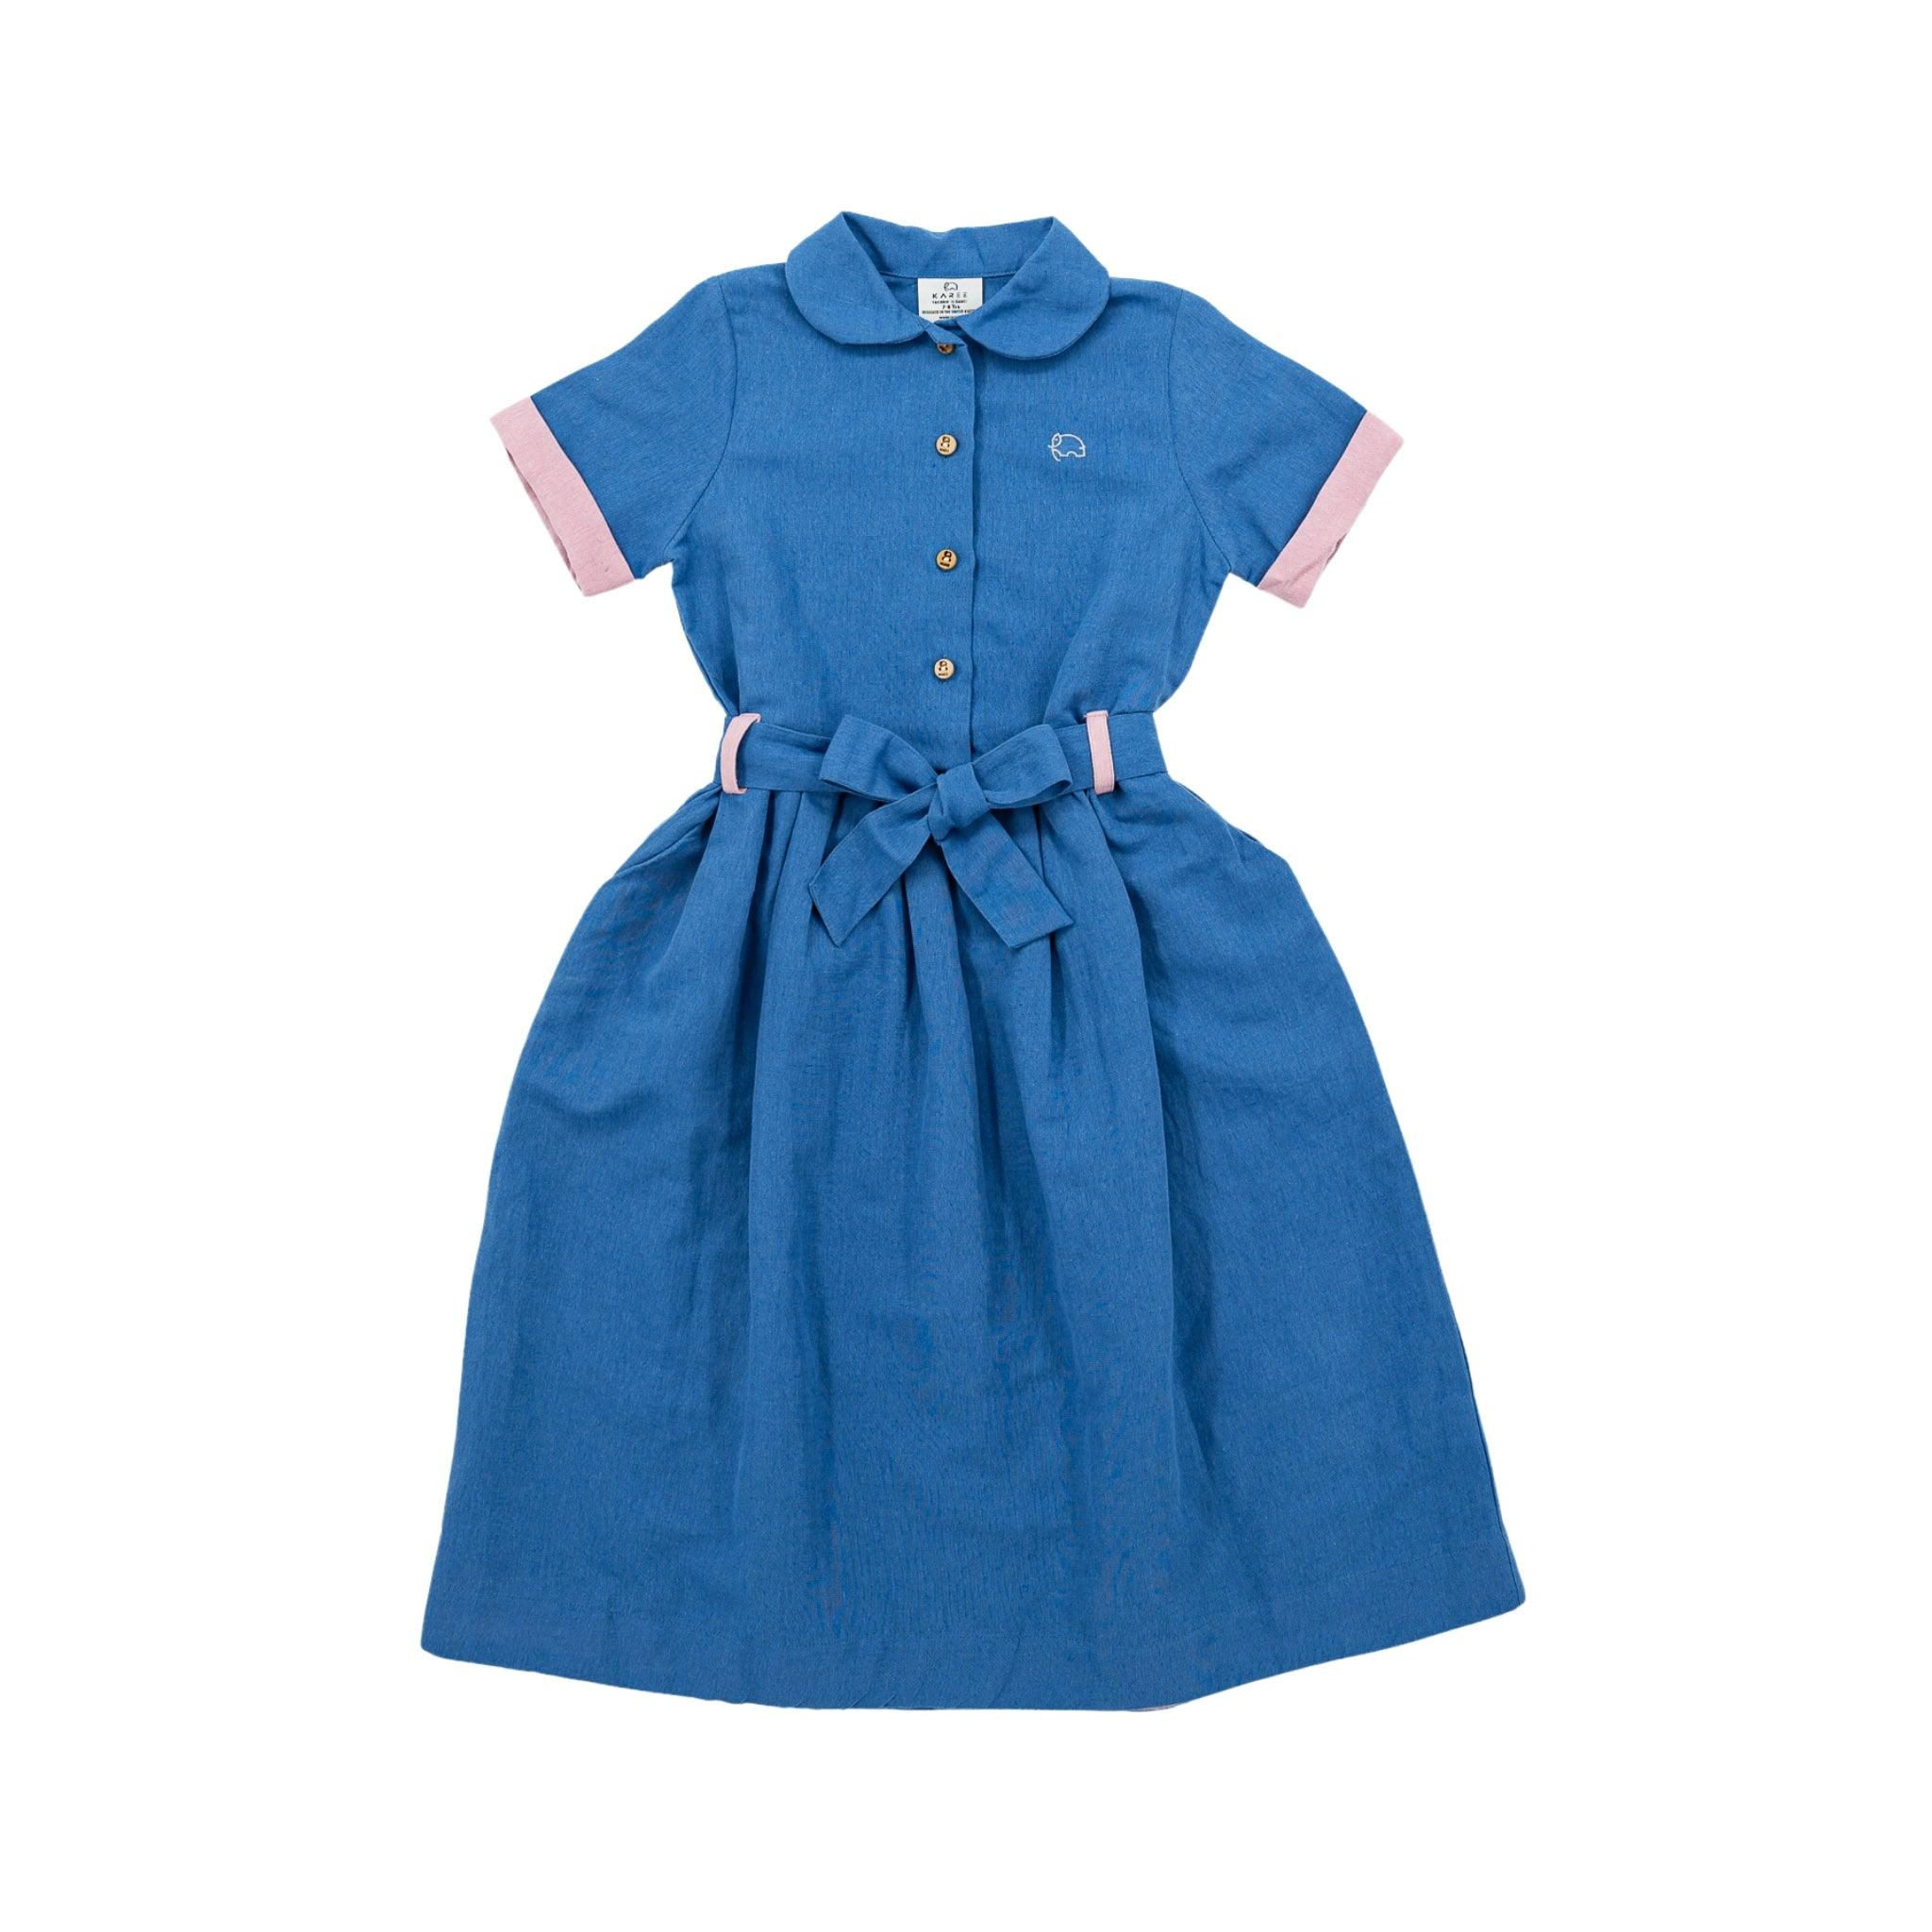 Karee's Parisian Blue Linen Dress for Girls, with short sleeves, contrasting pink cuffs, and a belted waist, displayed on a white background.